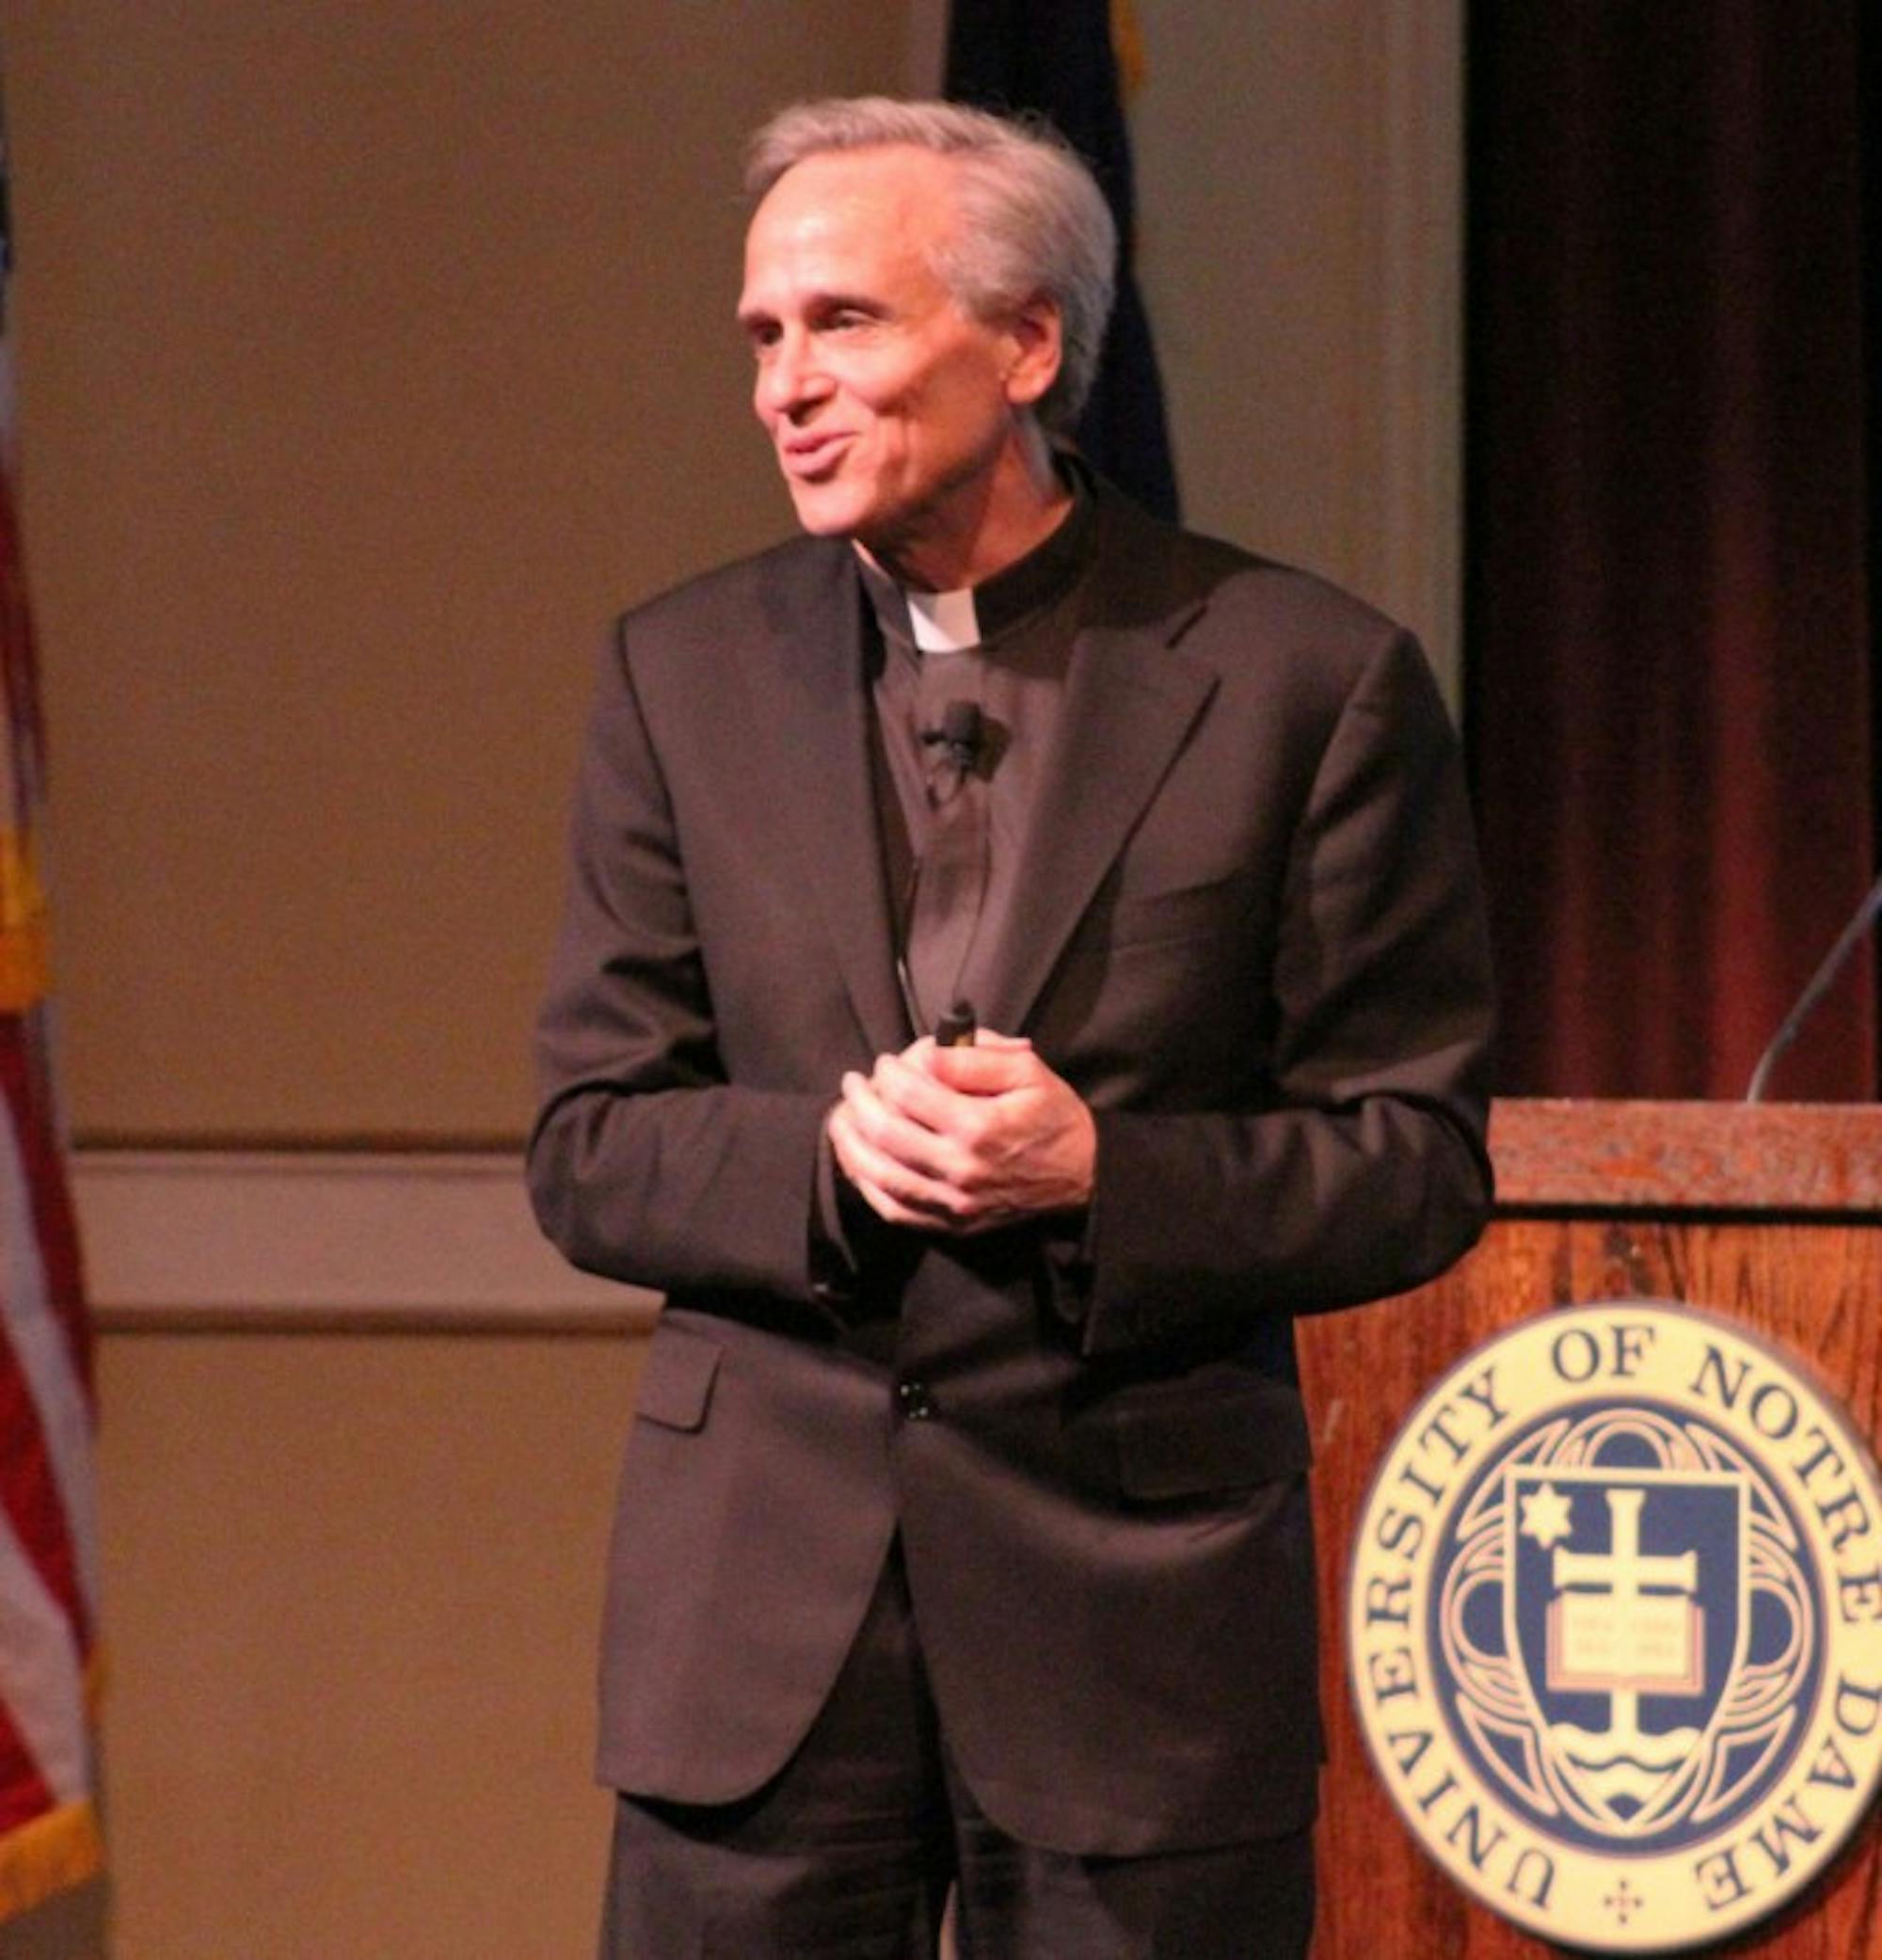 University President Fr. John Jenkins addresses members of the Notre Dame community at the fall town hall meeting Wednesday afternoon in Washington Hall.